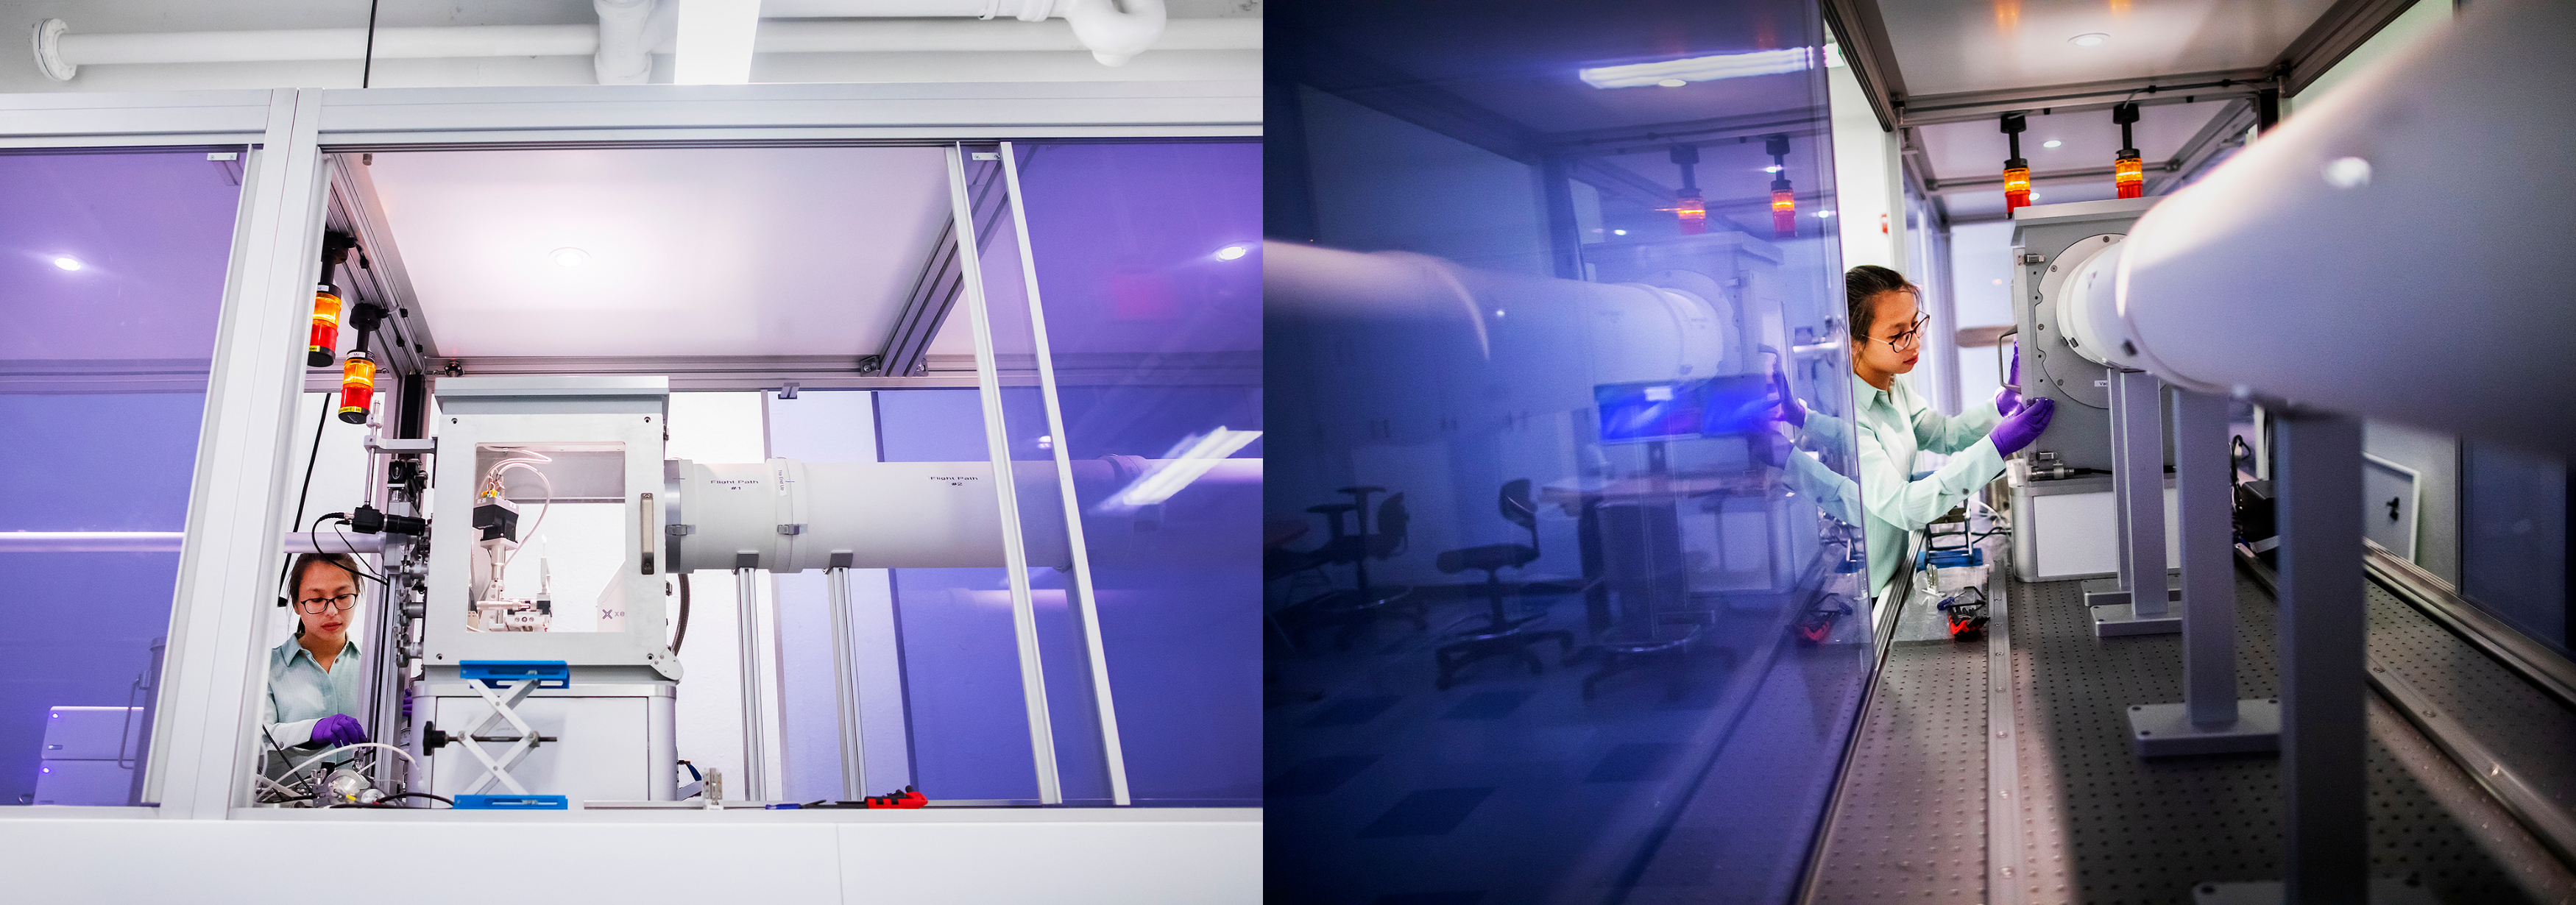 an x-ray scattering system made out of a long white tube connected to a sample box at one end. lee is shown in two separate images placing a sample inside of the box, partially obscured behind darkened panel glass